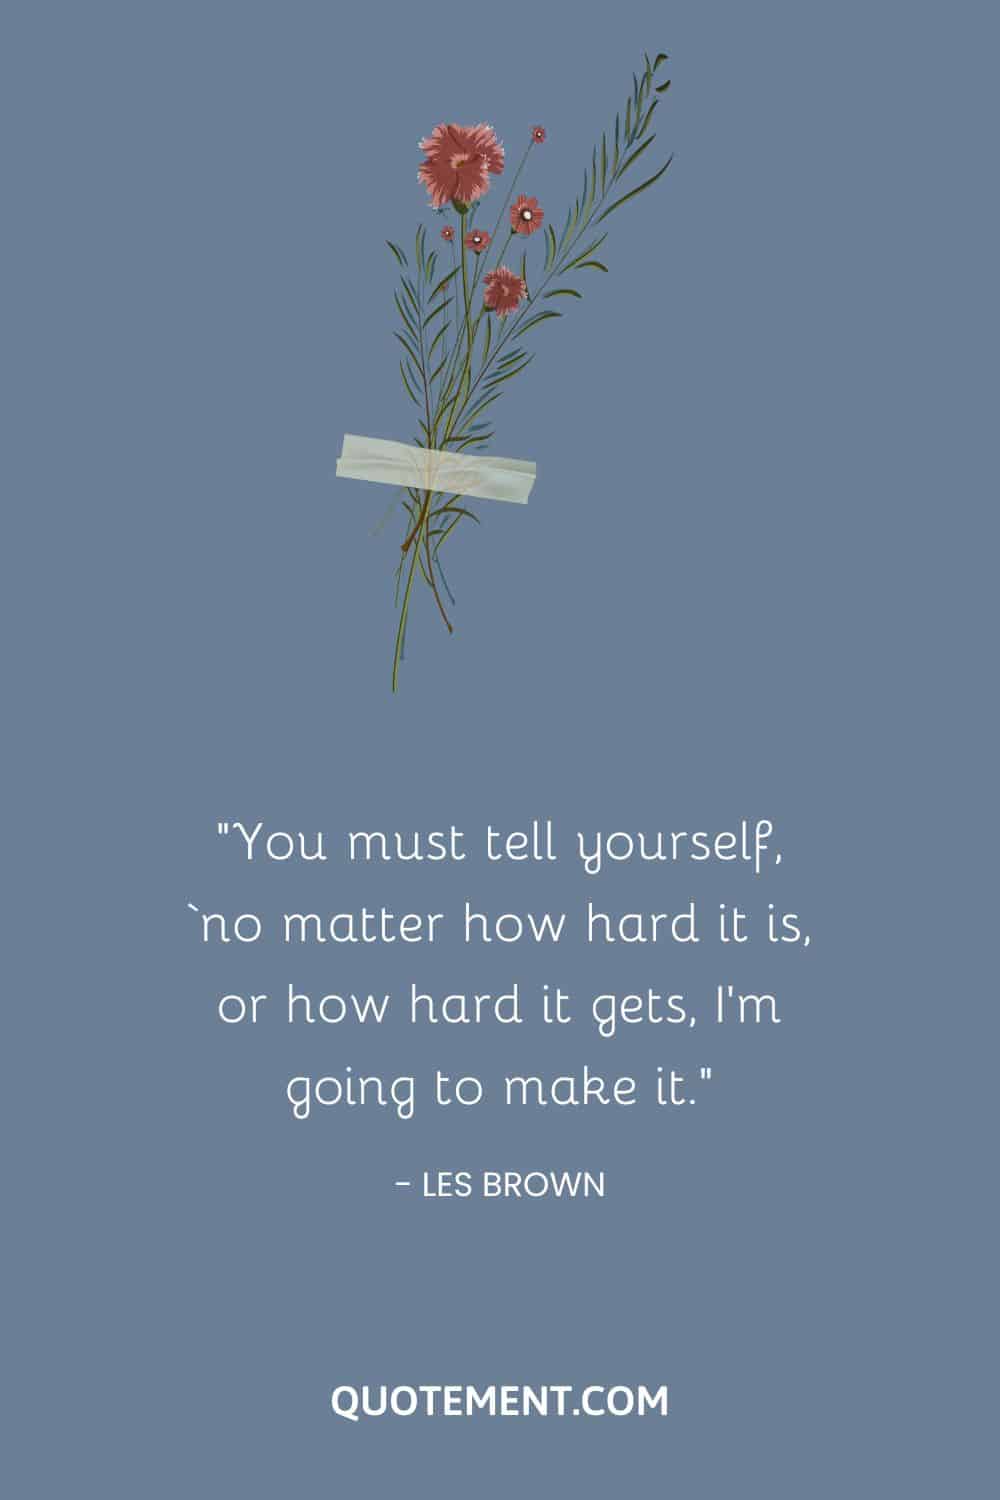 You must tell yourself, ‘no matter how hard it is, or how hard it gets, I’m going to make it